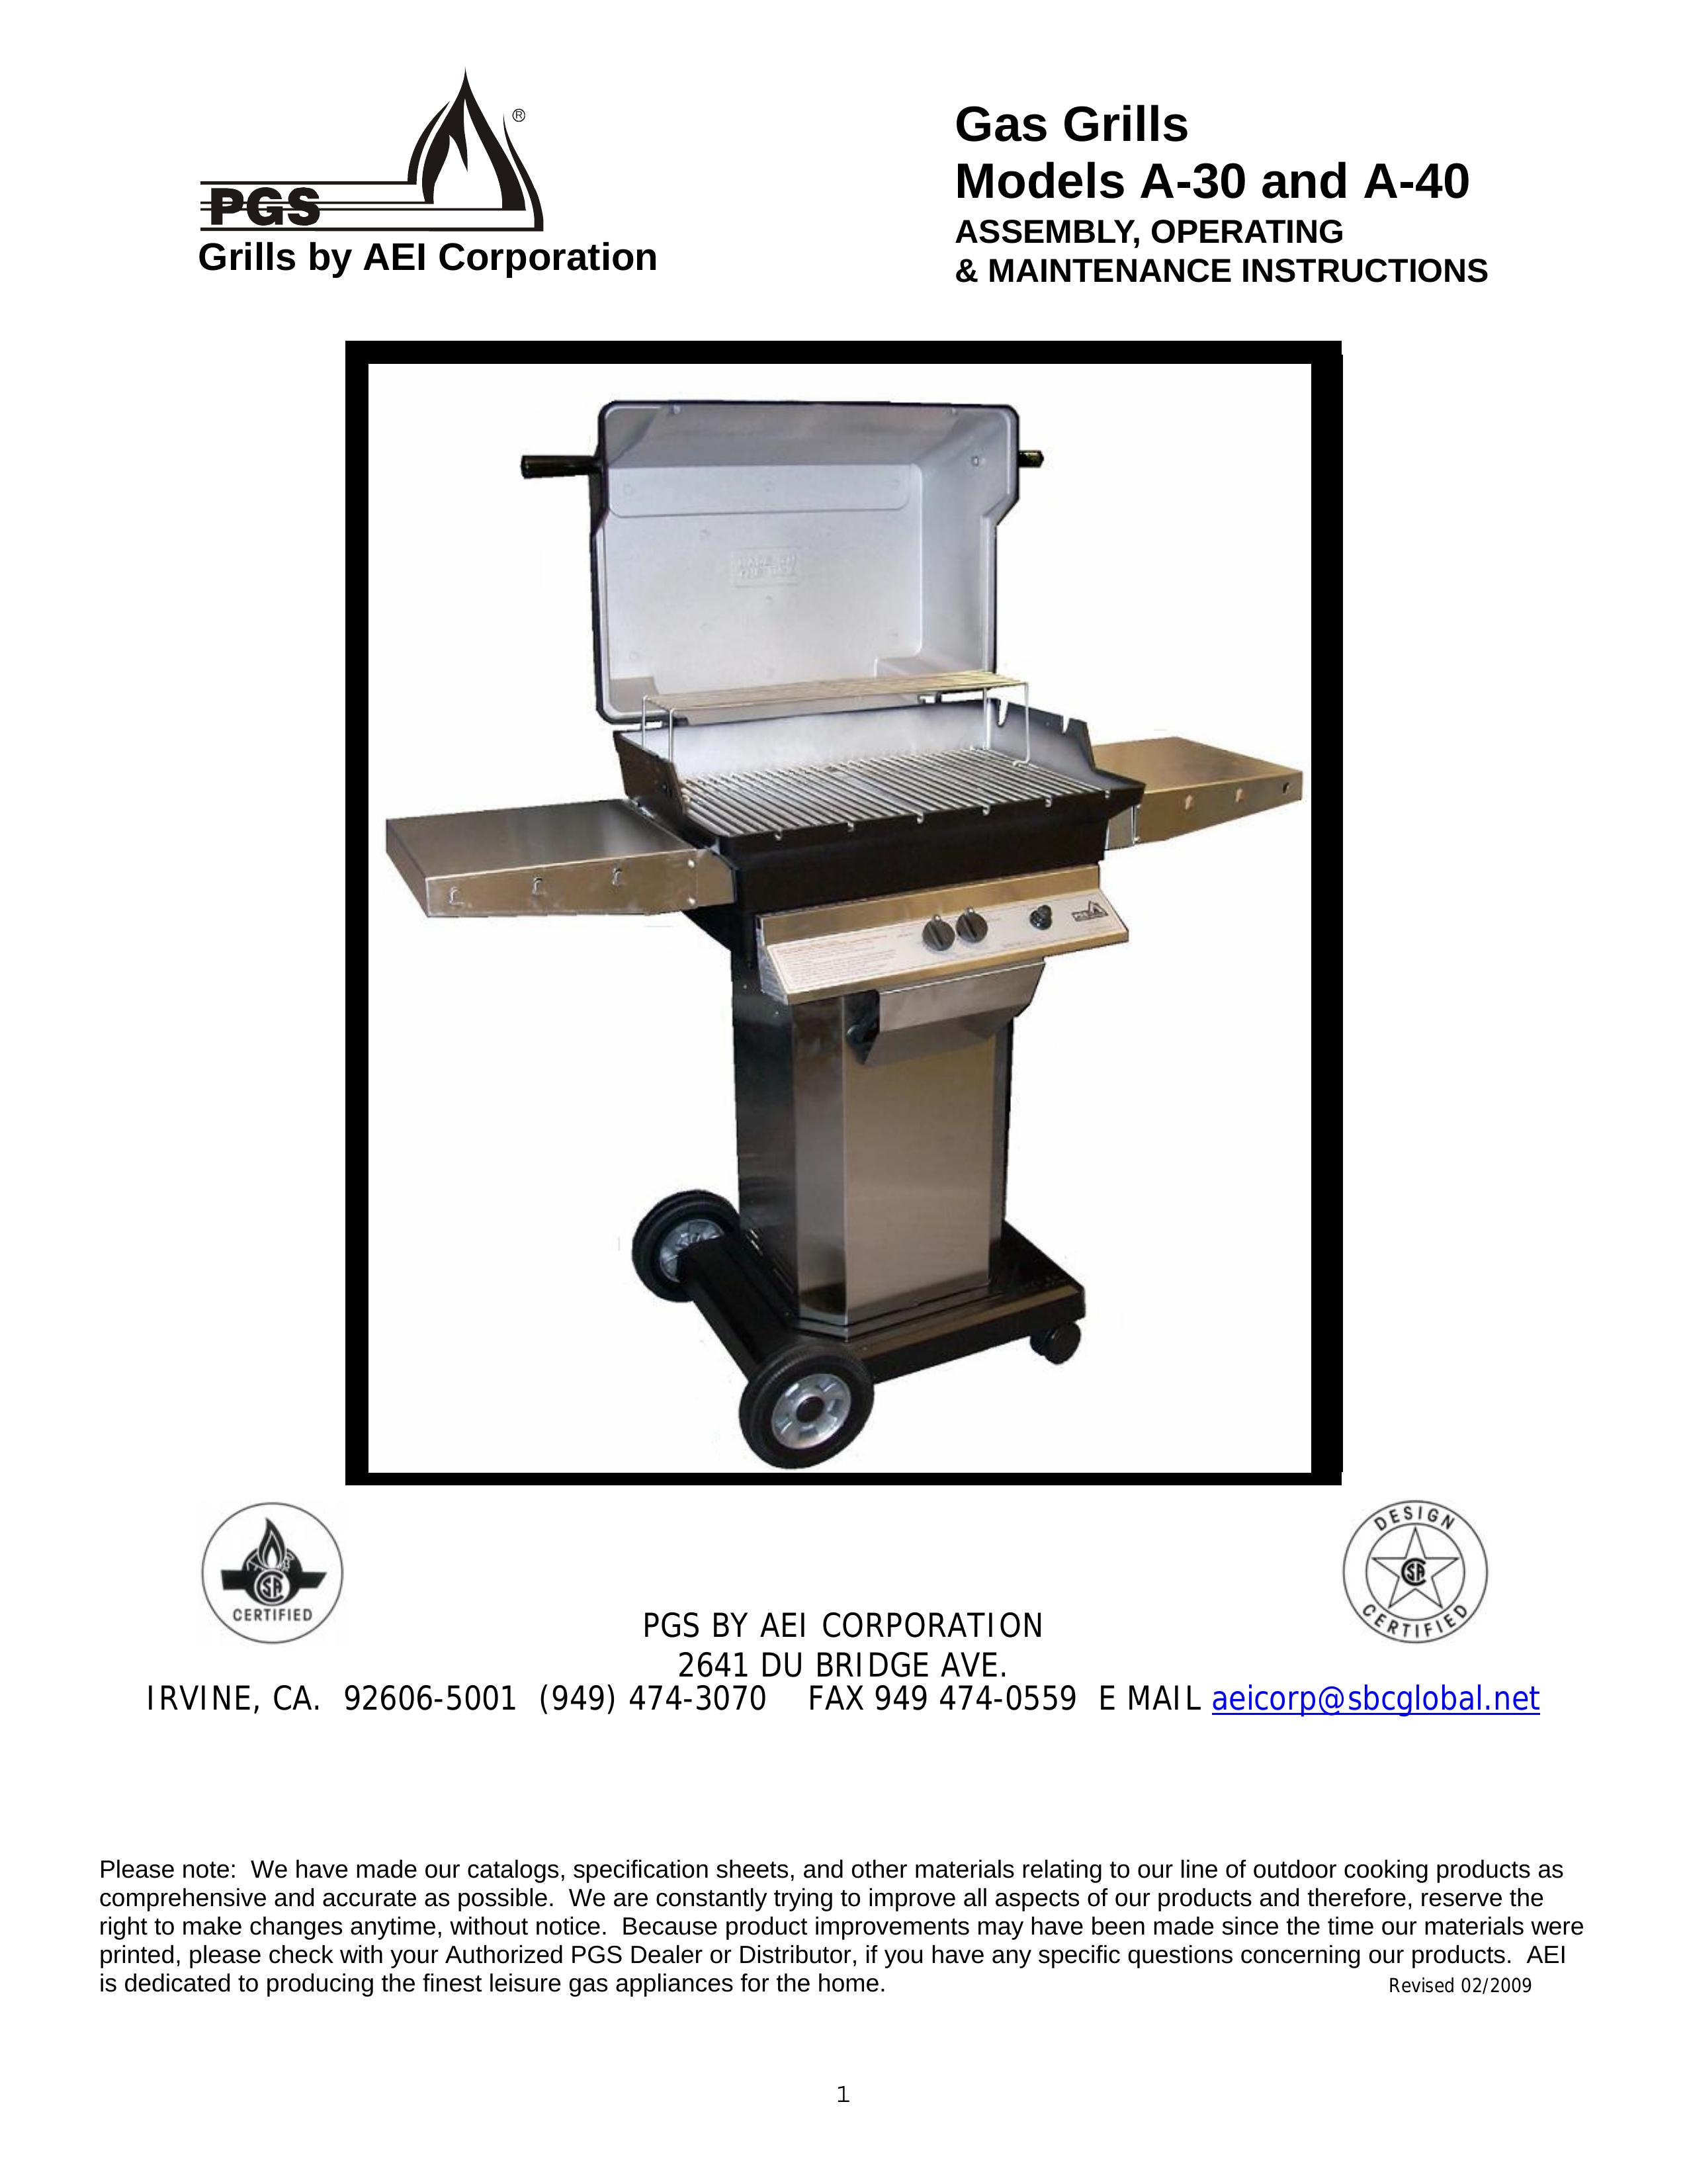 PGS A-40 Gas Grill User Manual